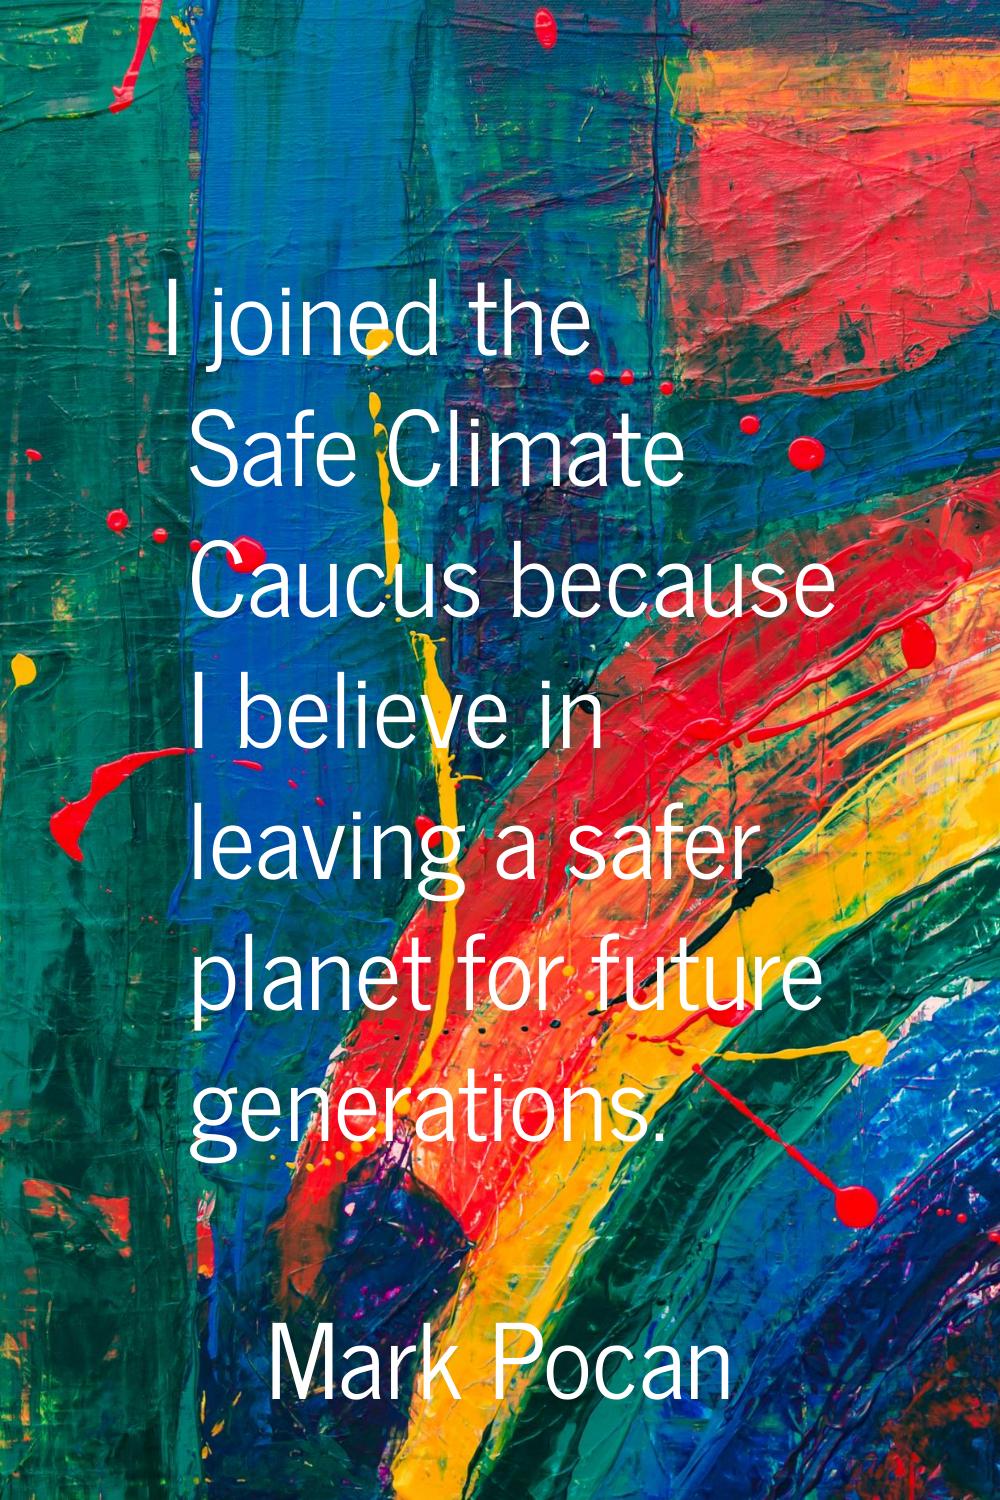 I joined the Safe Climate Caucus because I believe in leaving a safer planet for future generations